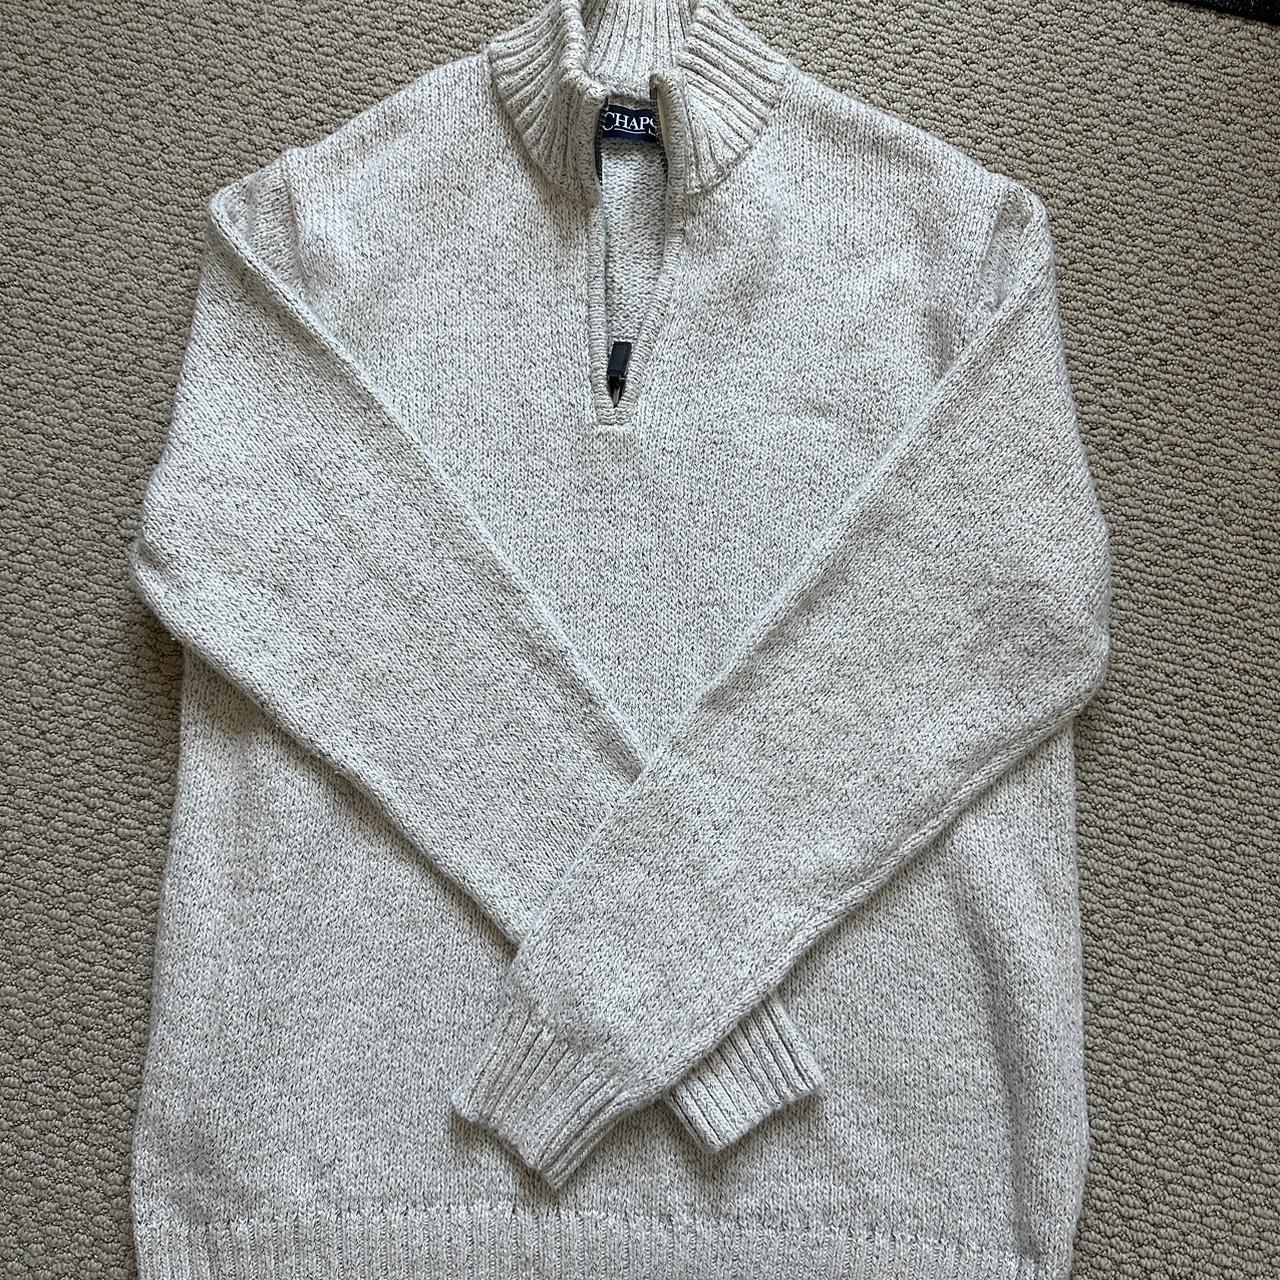 Chaps Men's White and Grey Jumper | Depop